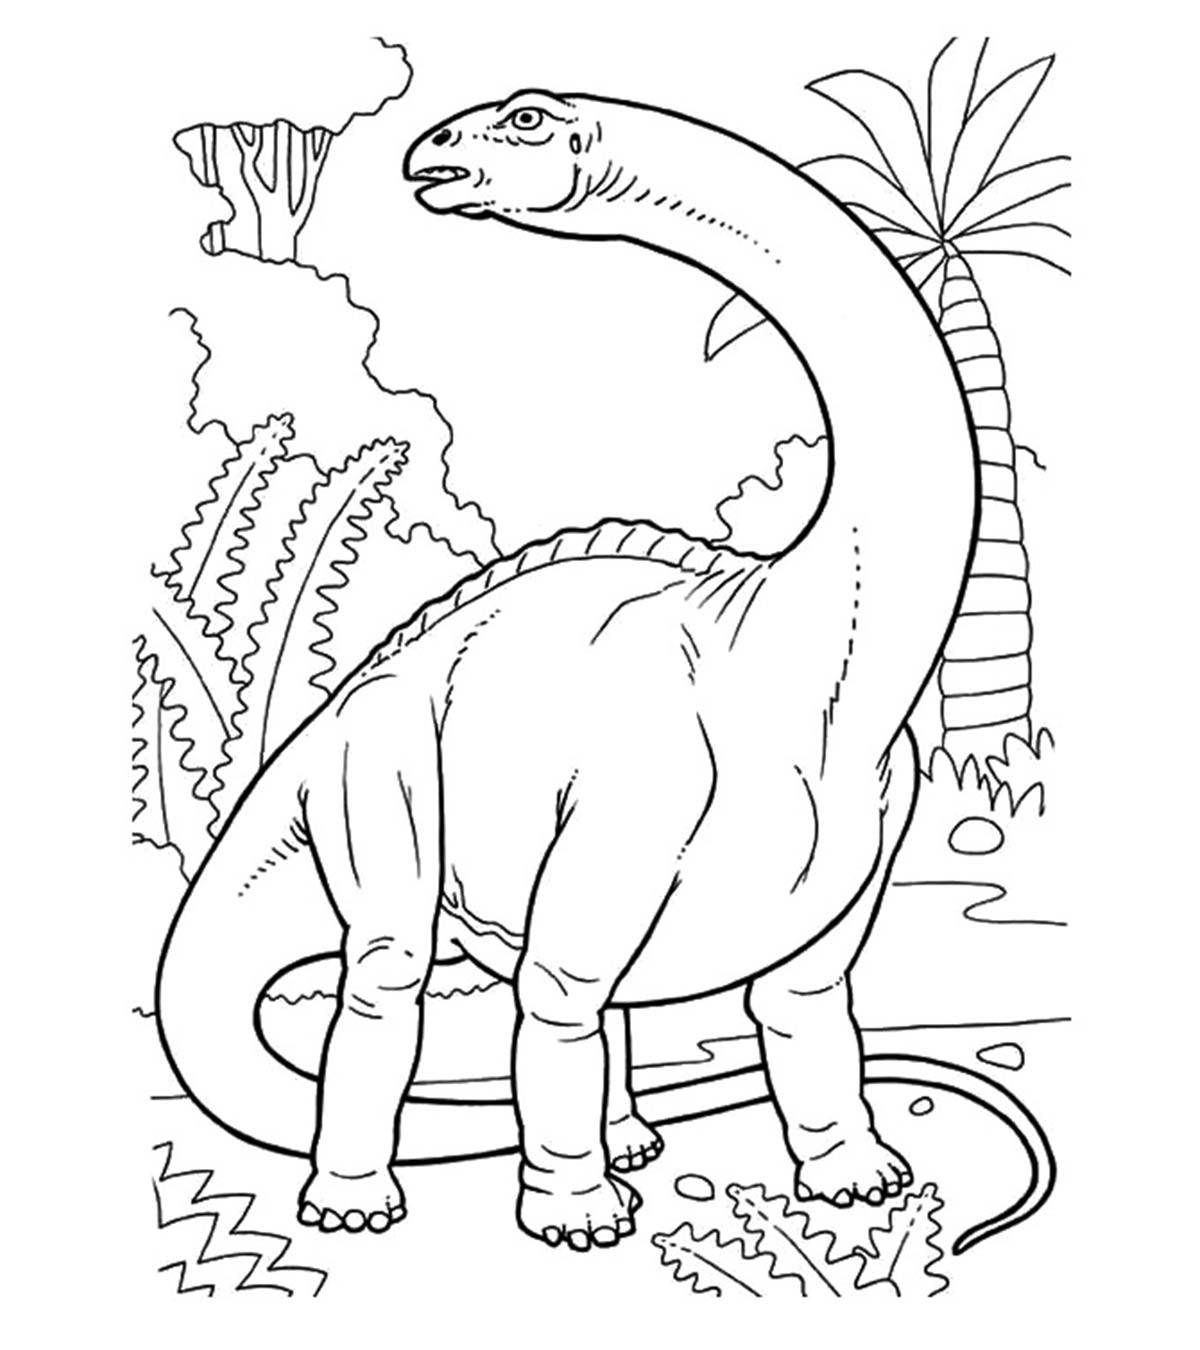 837 Unicorn Big Dinosaur Coloring Pages for Kids